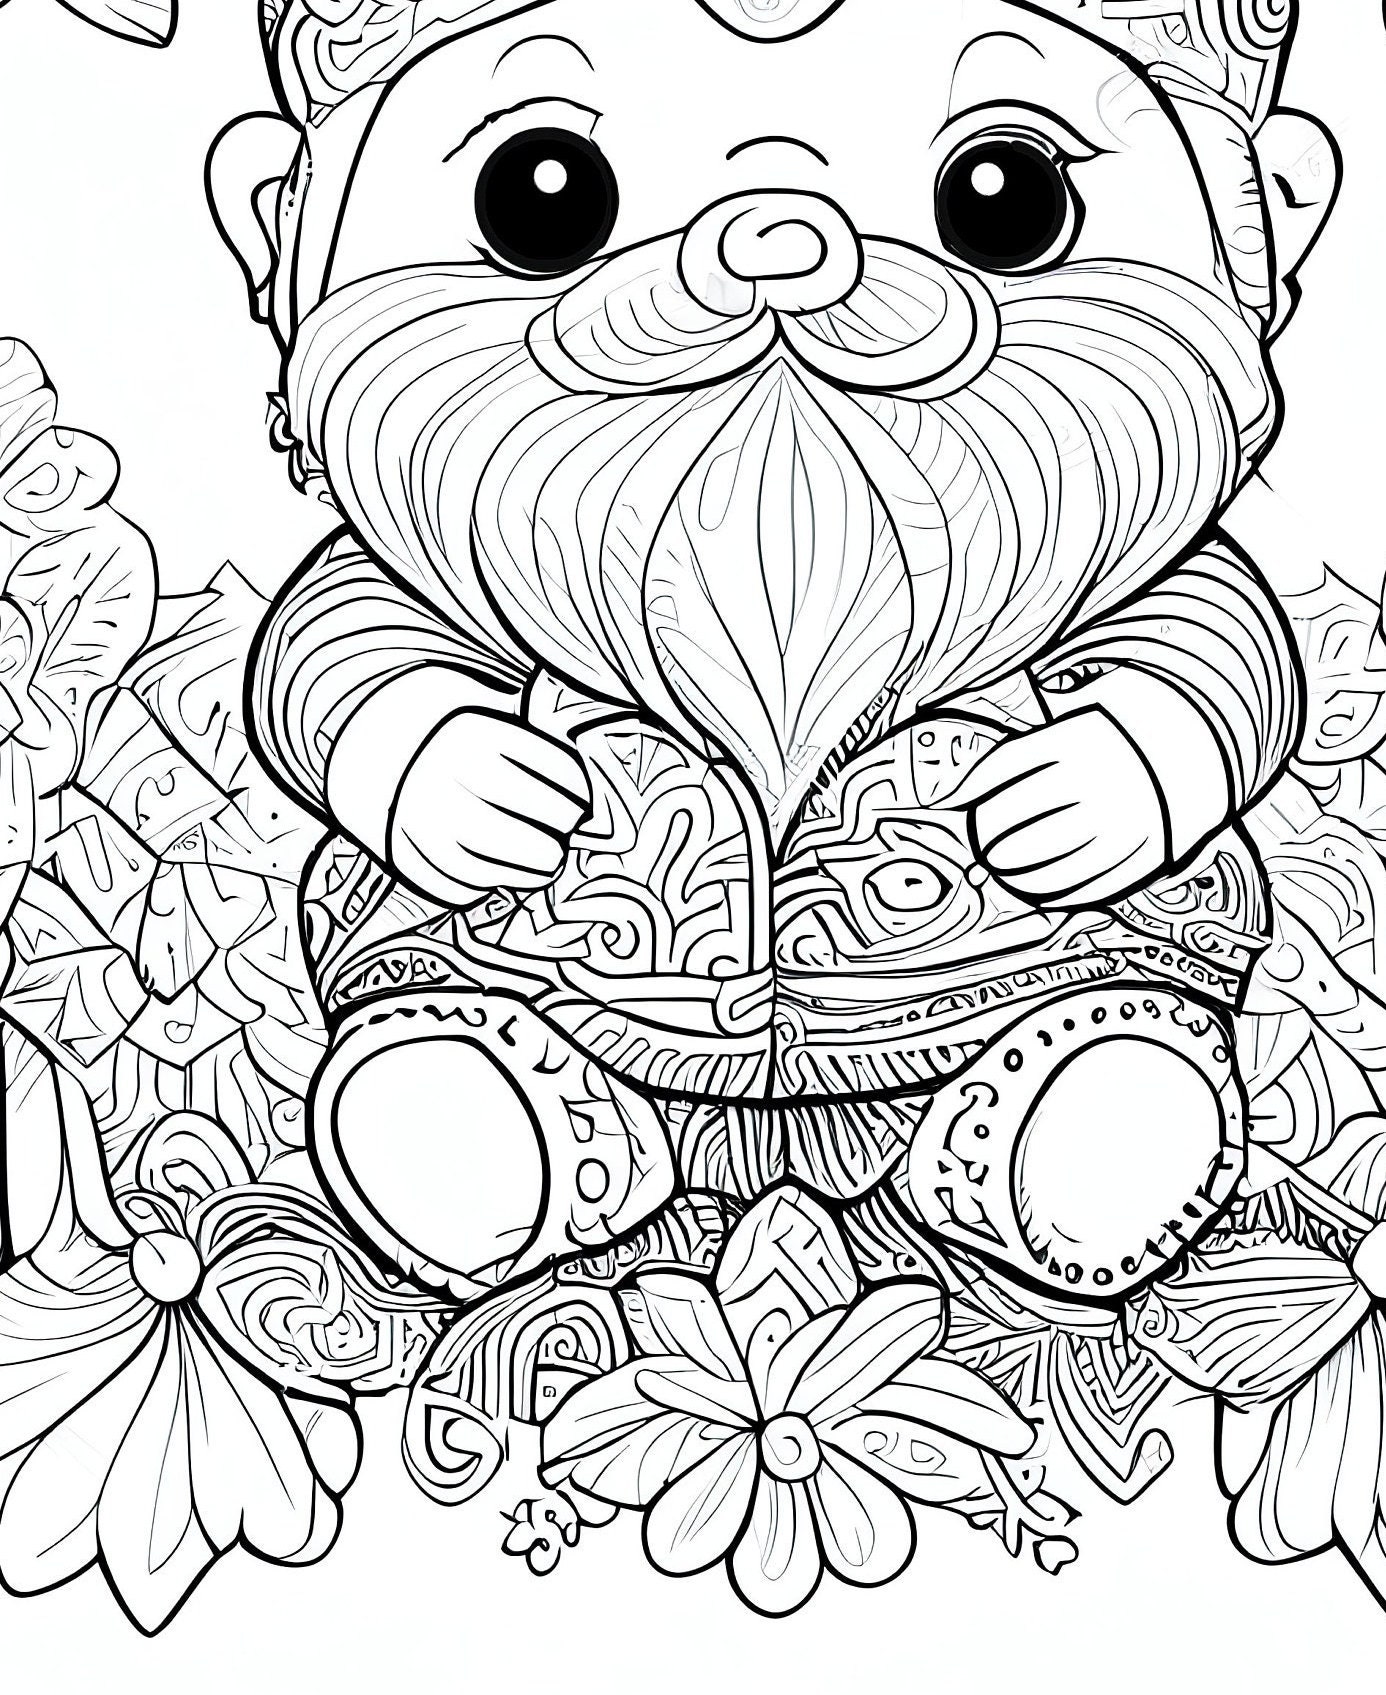 Pack stress relief coloring pages garden gnome digital print detailed mandala instant download set coloring books adults download now